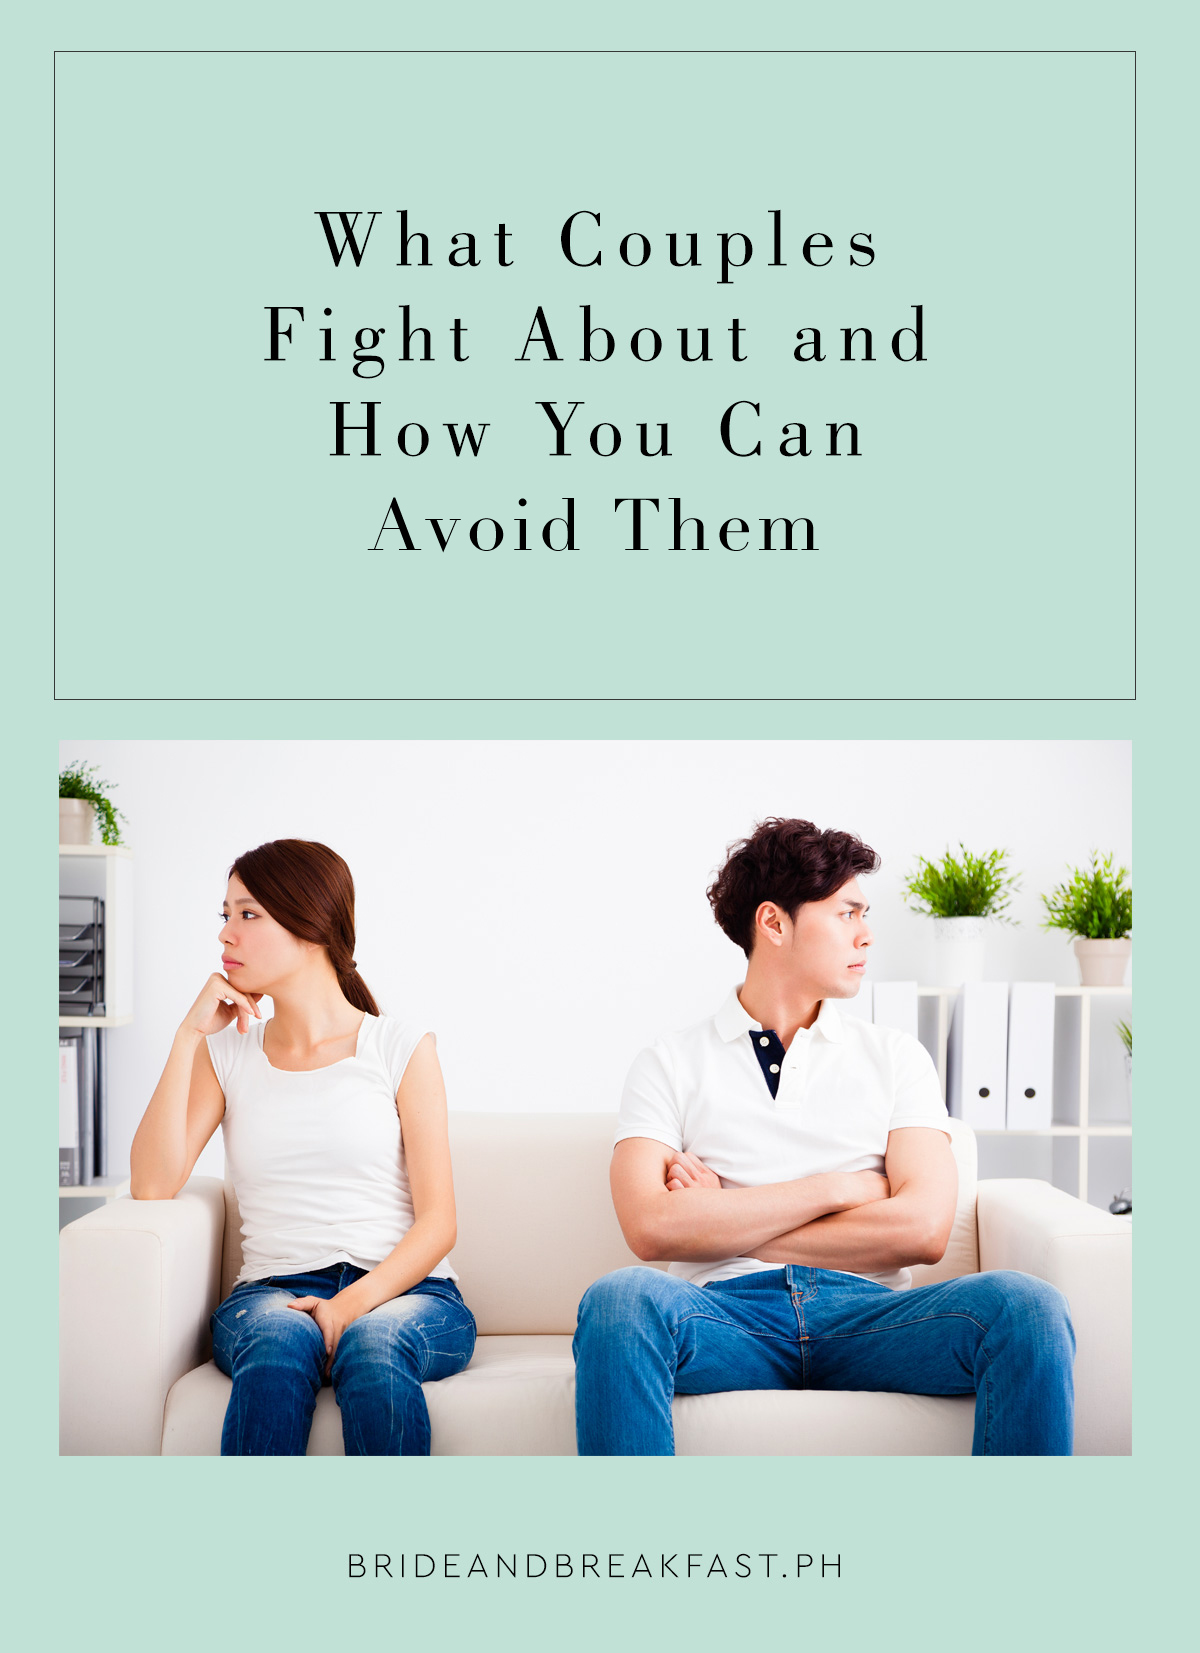 What Couples Fight About and How You Can Avoid Them